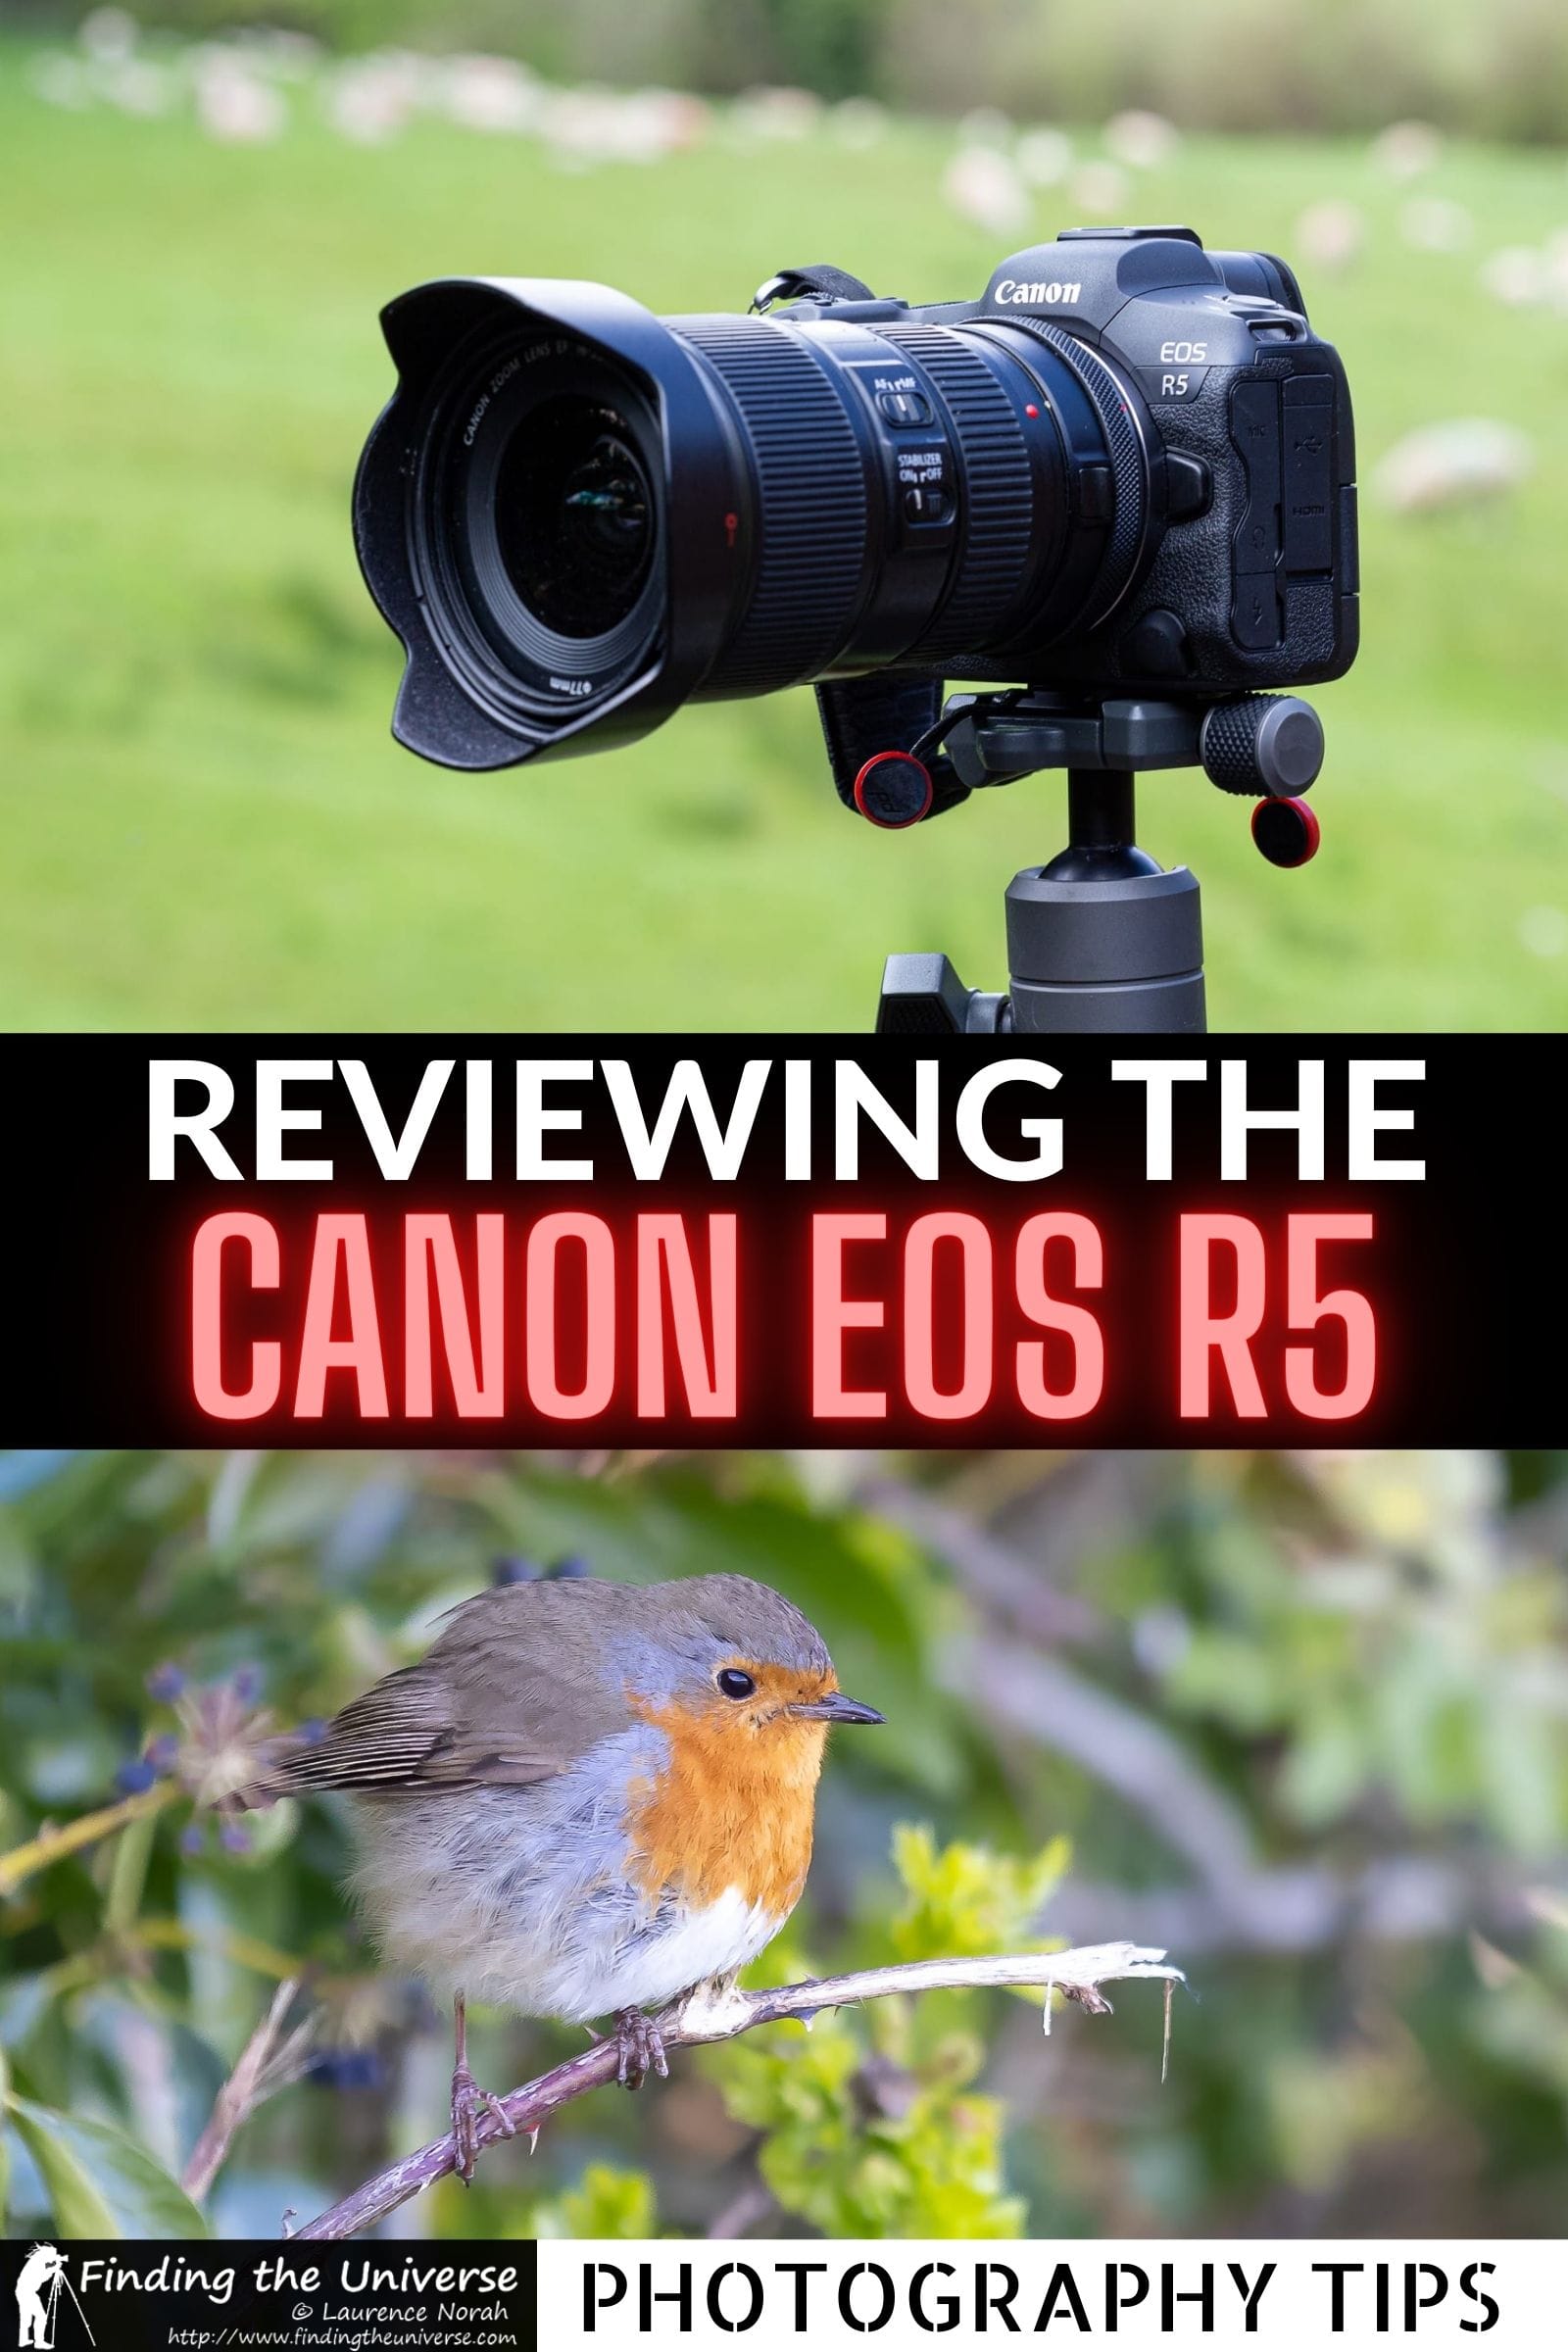 Canon EOS R5: Full Mirrorless Camera Review